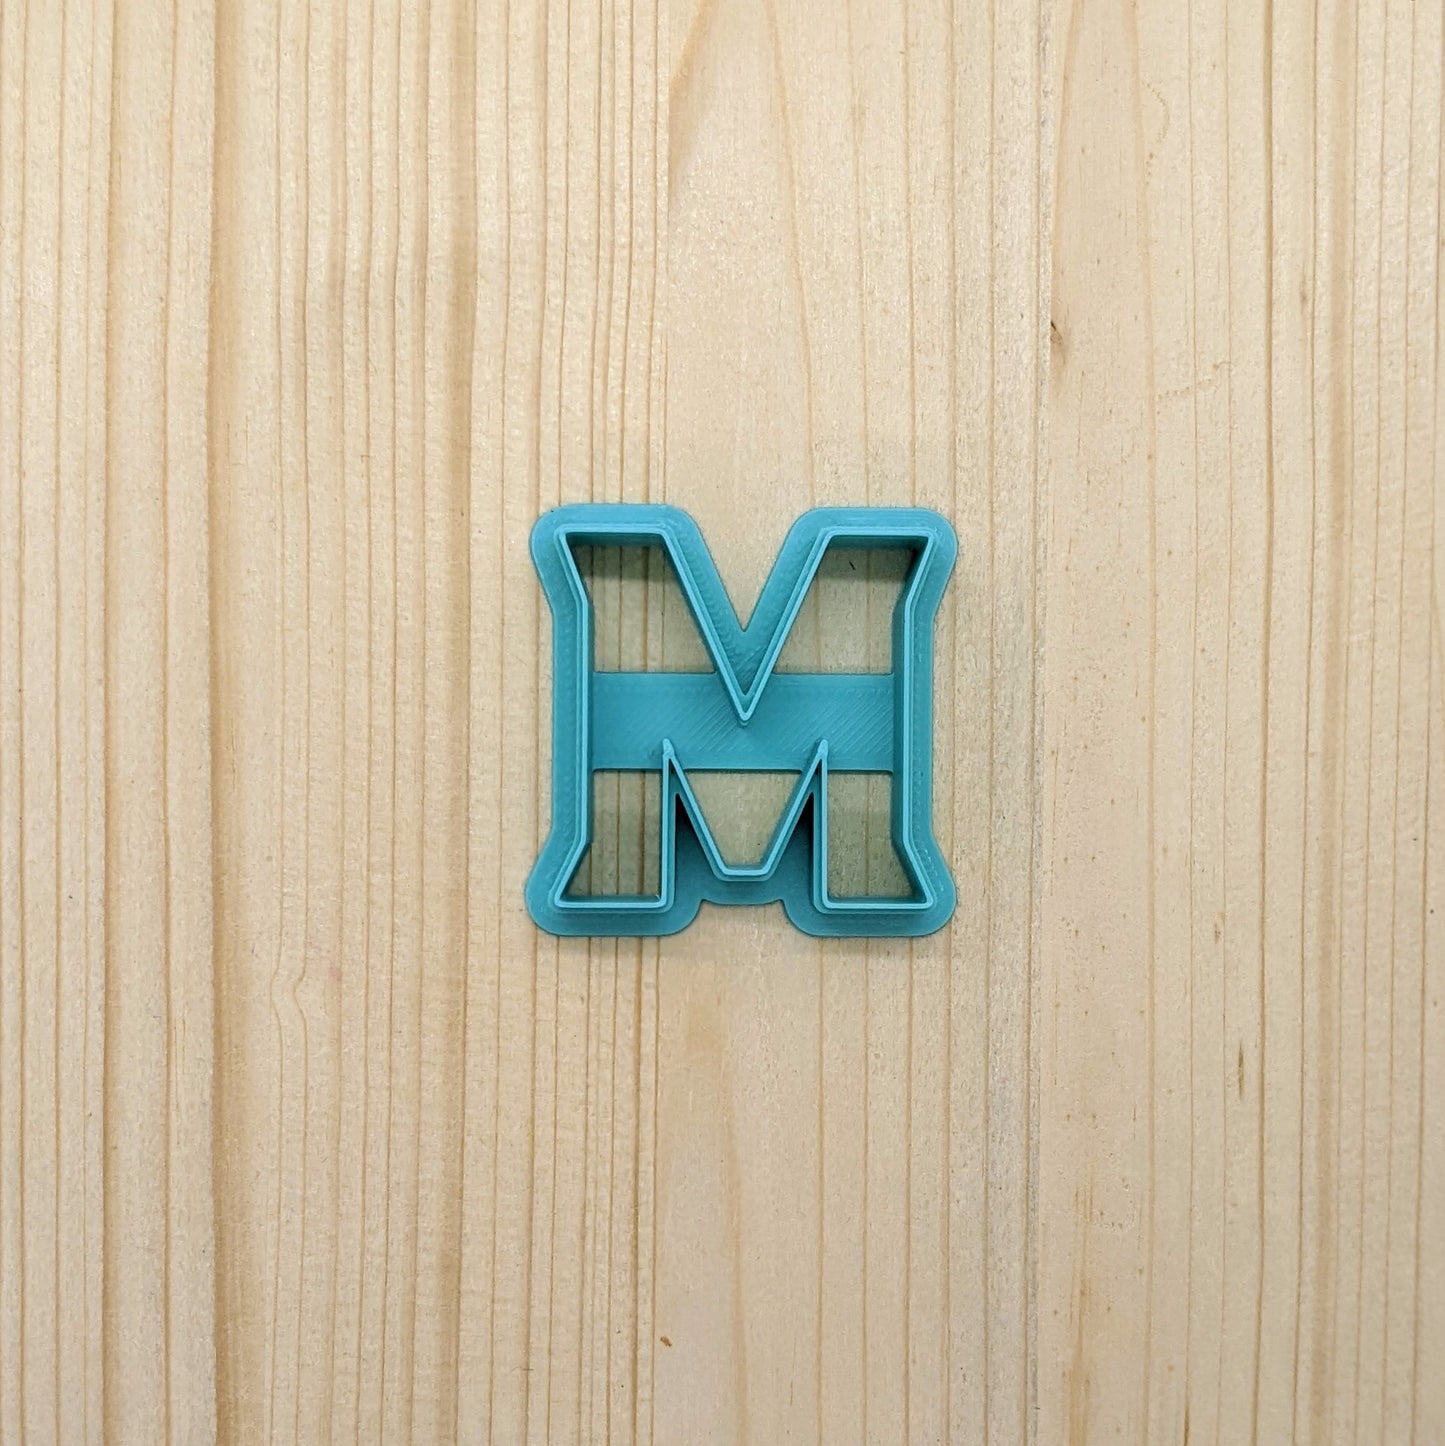 University of Maryland M Cookie Cutter for Cookies, Ceramics, Pottery, Polymer Clay, Fondant - Multi-Medium Craft & Baking Tool